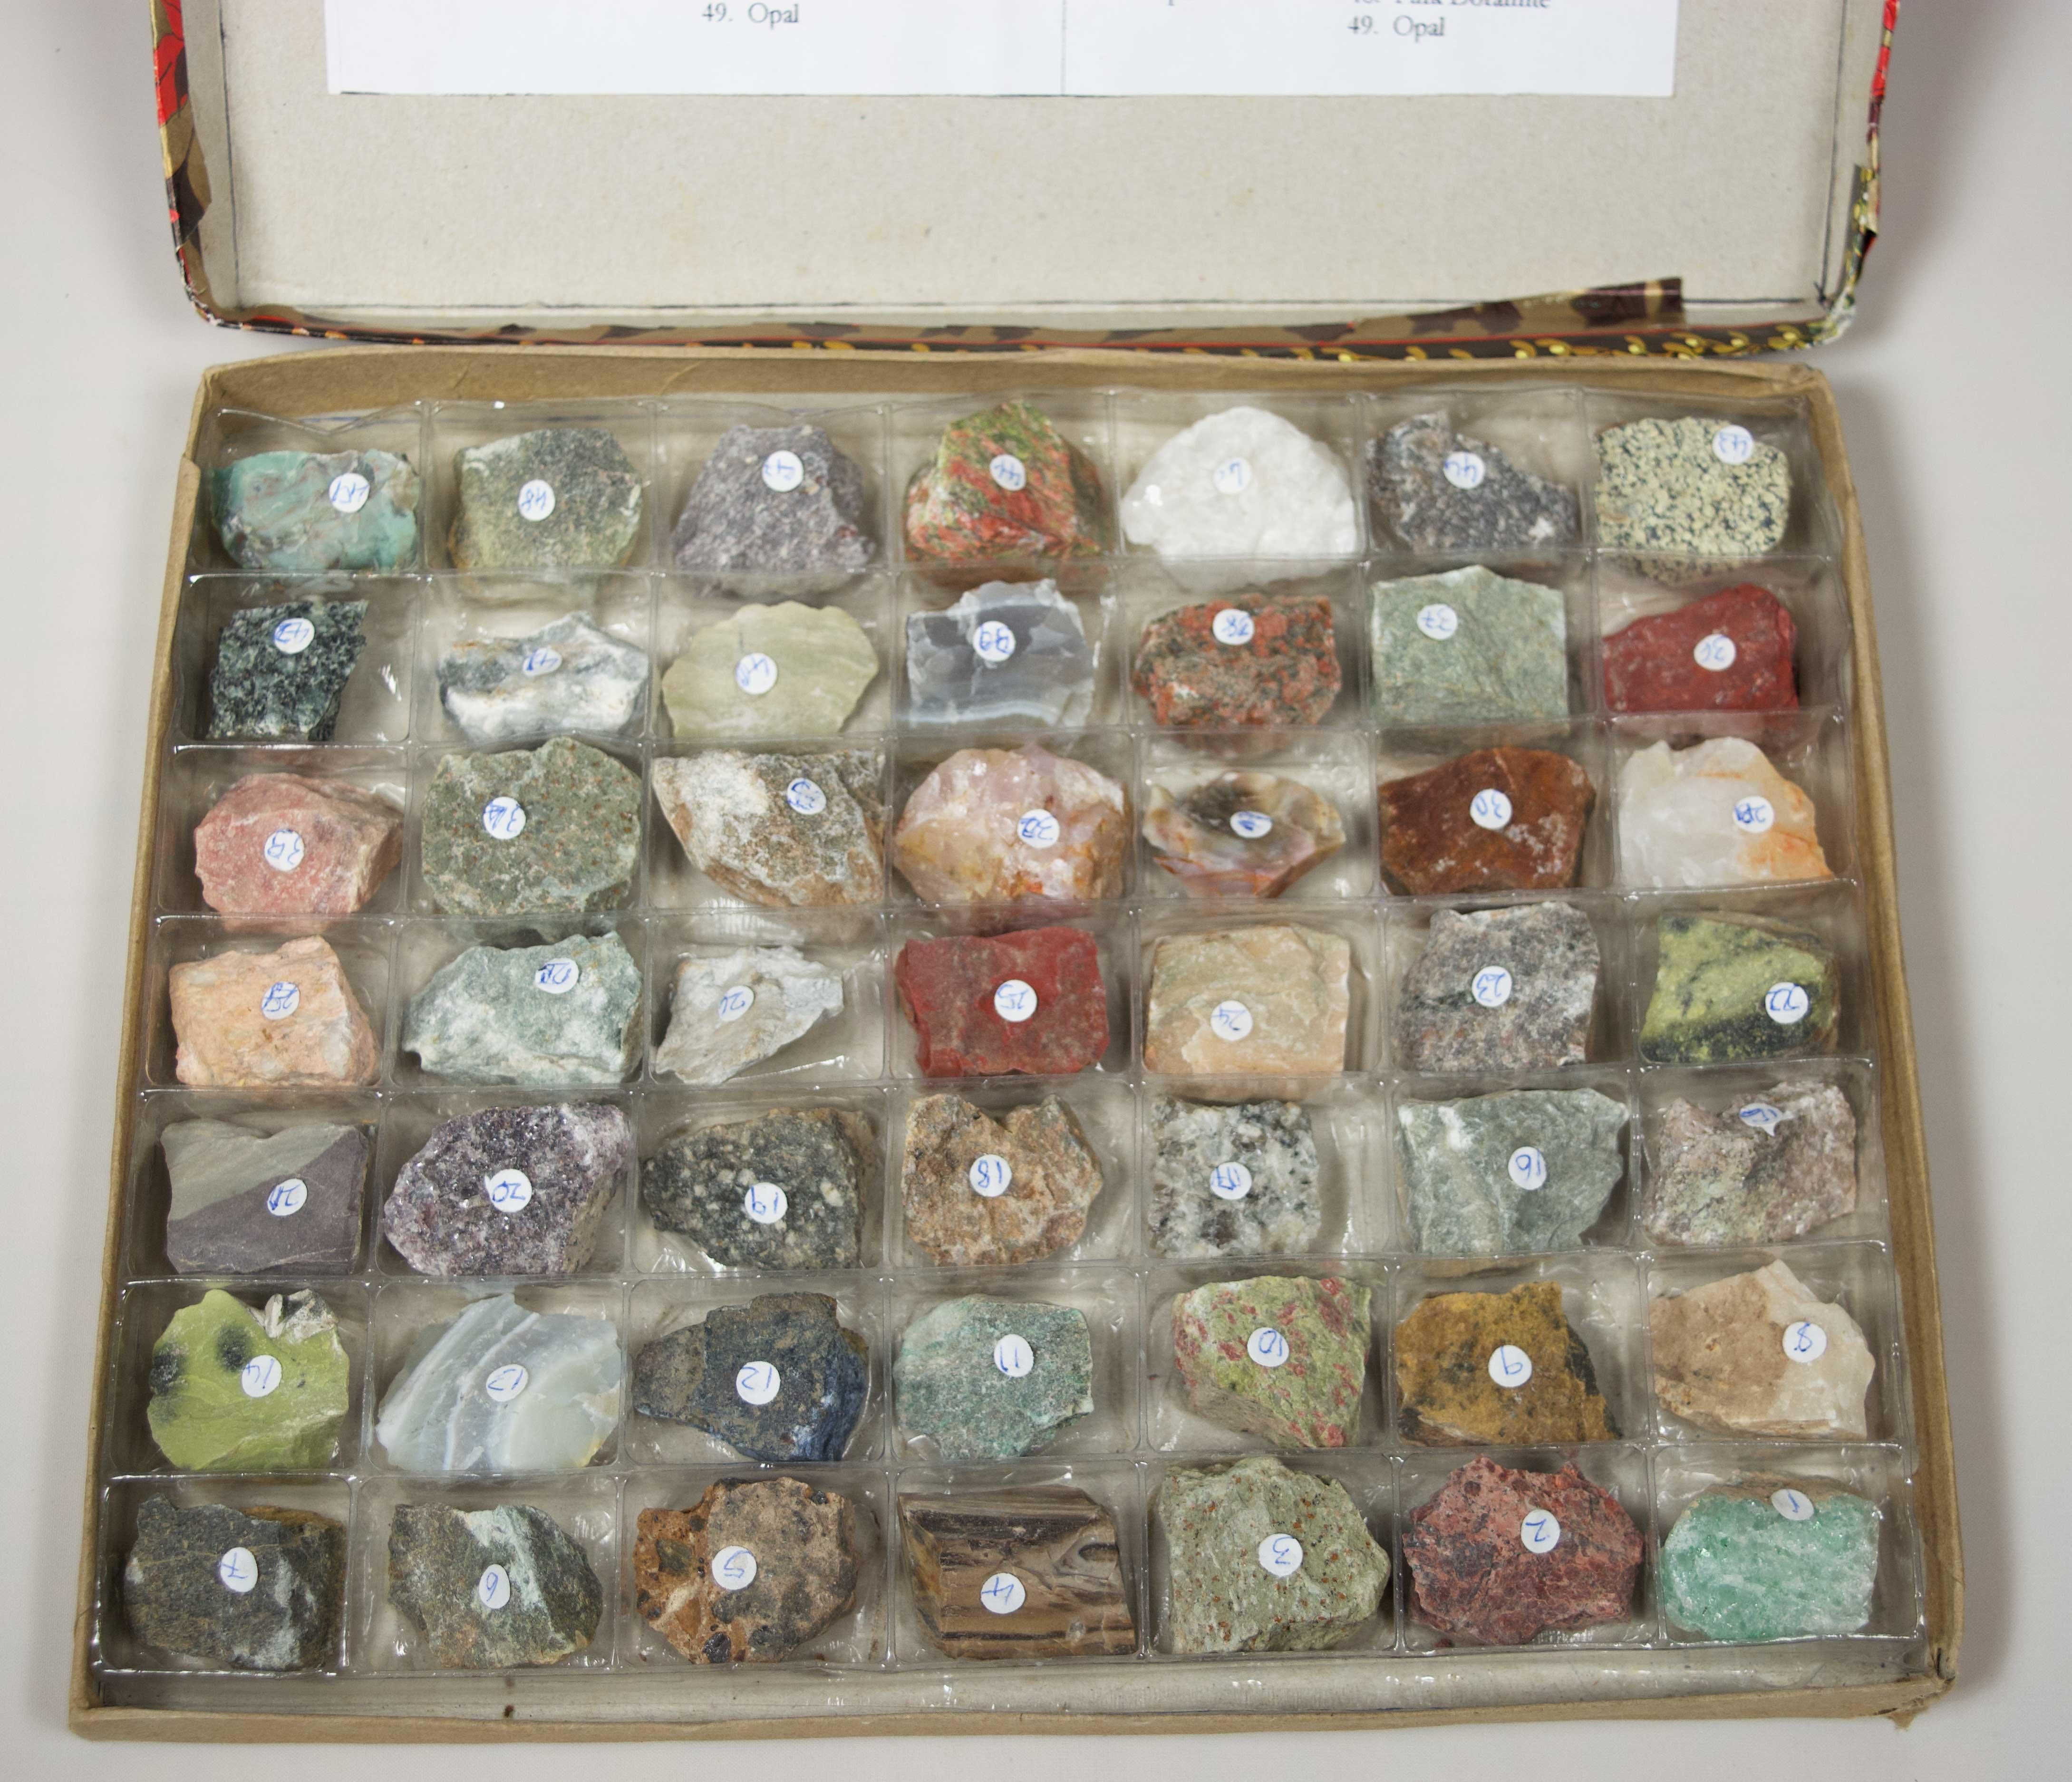 49 Shona Stone Samples with Specimen Box - Mixed Media Art by Unknown